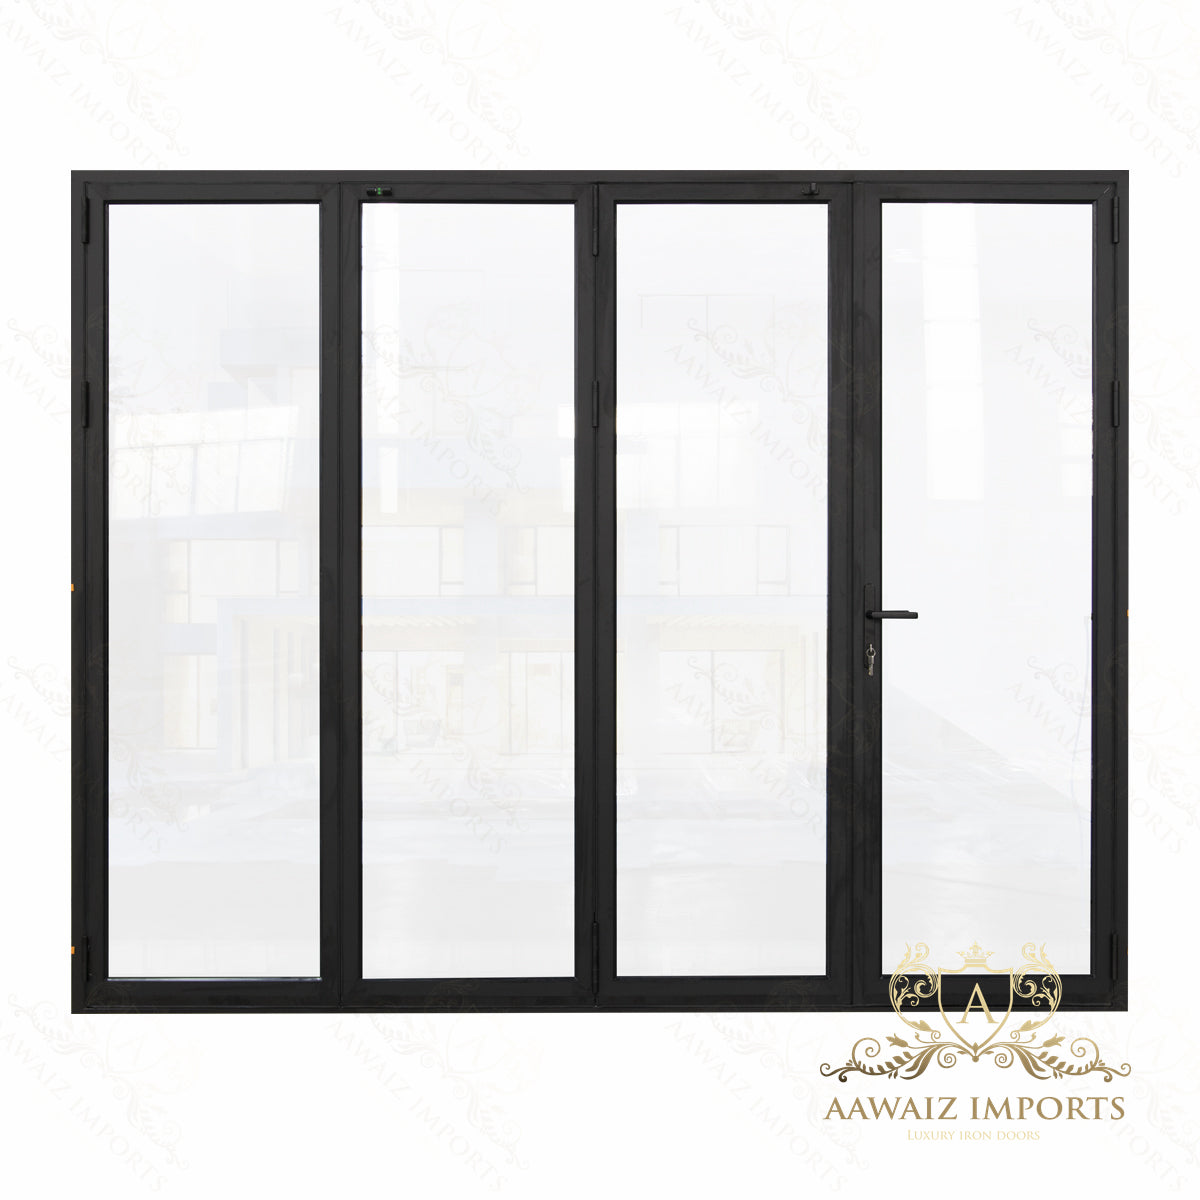 10 Ft Wide By 8 Ft Tall (120" By 96") Aluminum Bi Fold Patio Door  Outswing  Thermal Break Insulated Matt Black Finish